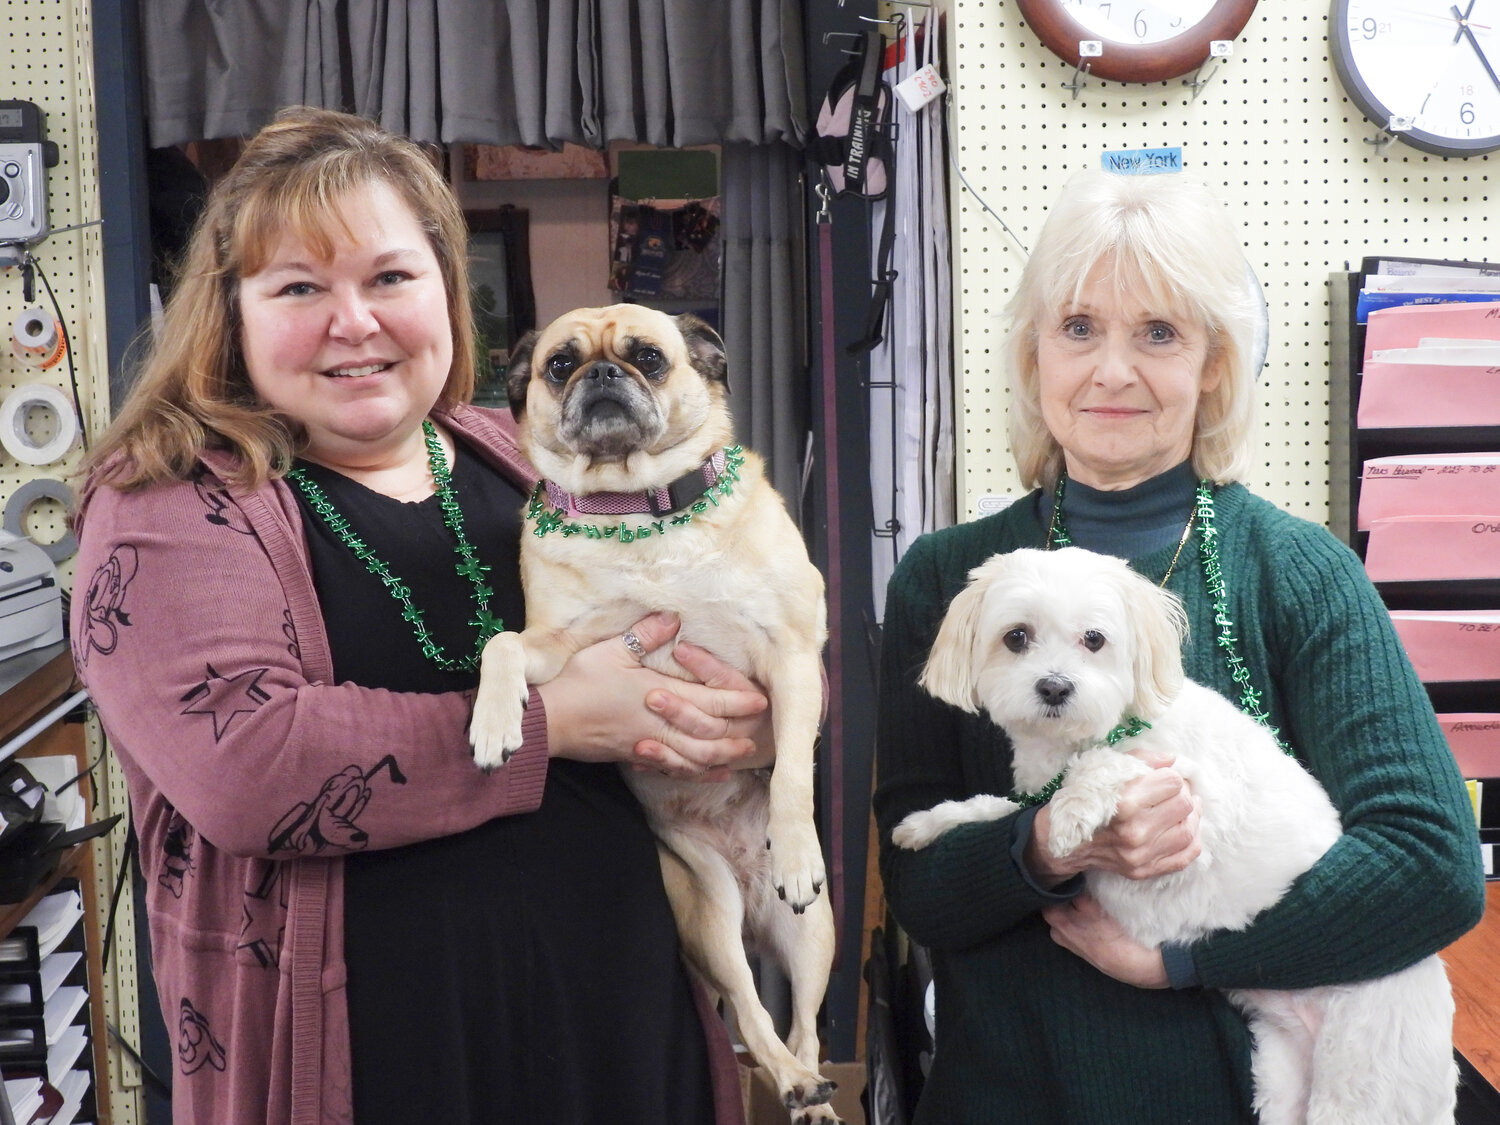 Oneida Office Supply Owner Nancy Kinney, right, and Manager Stacy Jones are happy to help anyone who comes through their door. Their dogs, Poppy and Daisy, are a common sight at the store and fond of guests